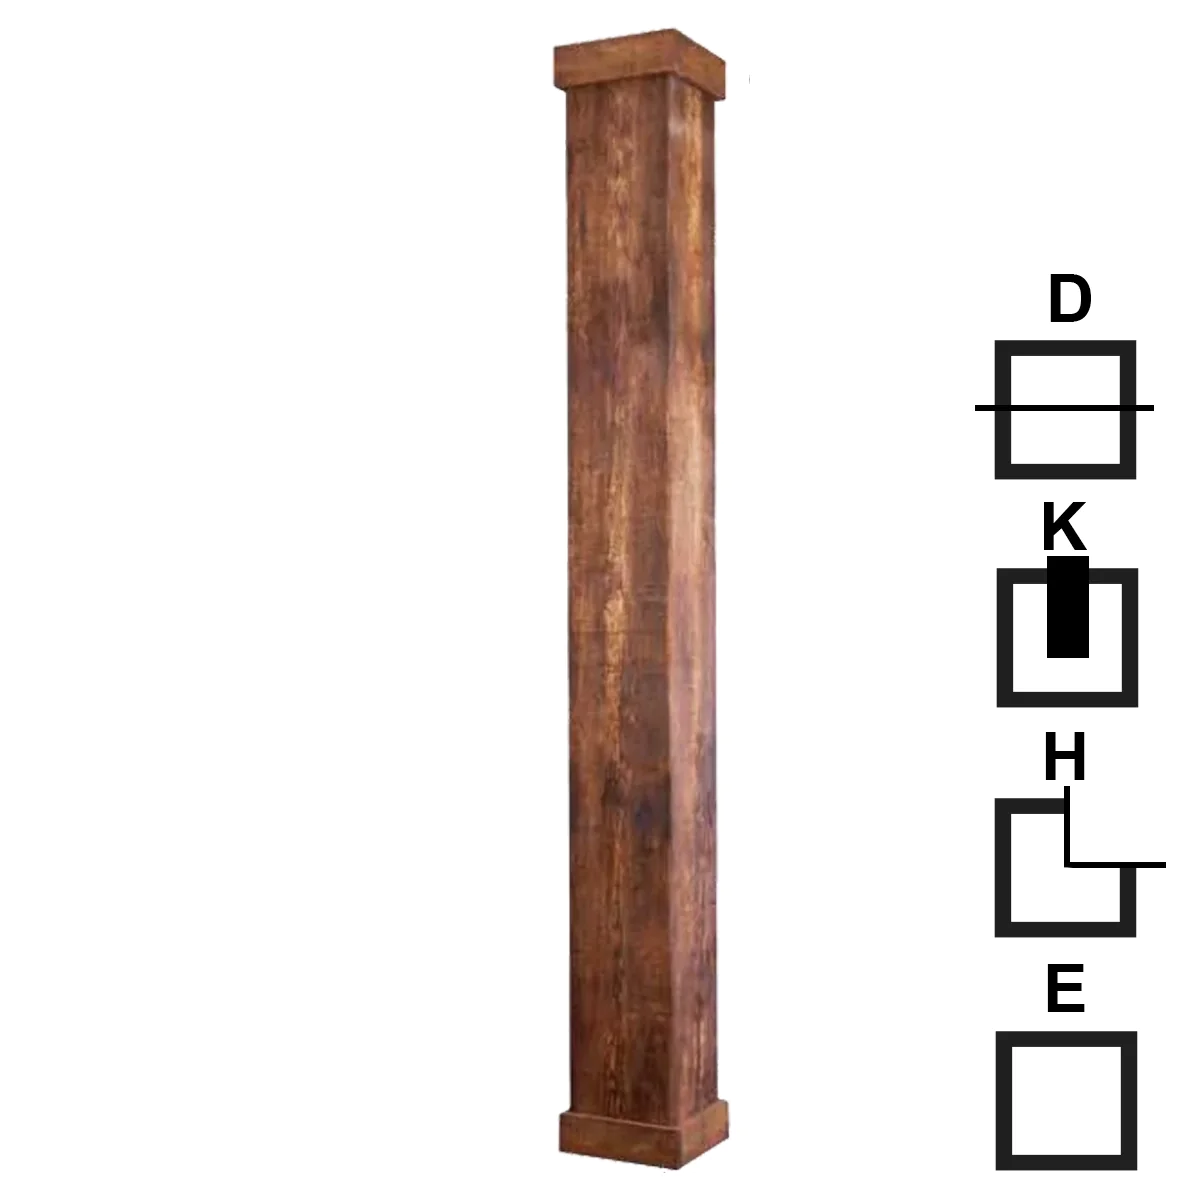 8" x 8" Square Wood Look Fiberglass Columns - Non-Tapered, Roughsawn - 4" Trim Capital and Base